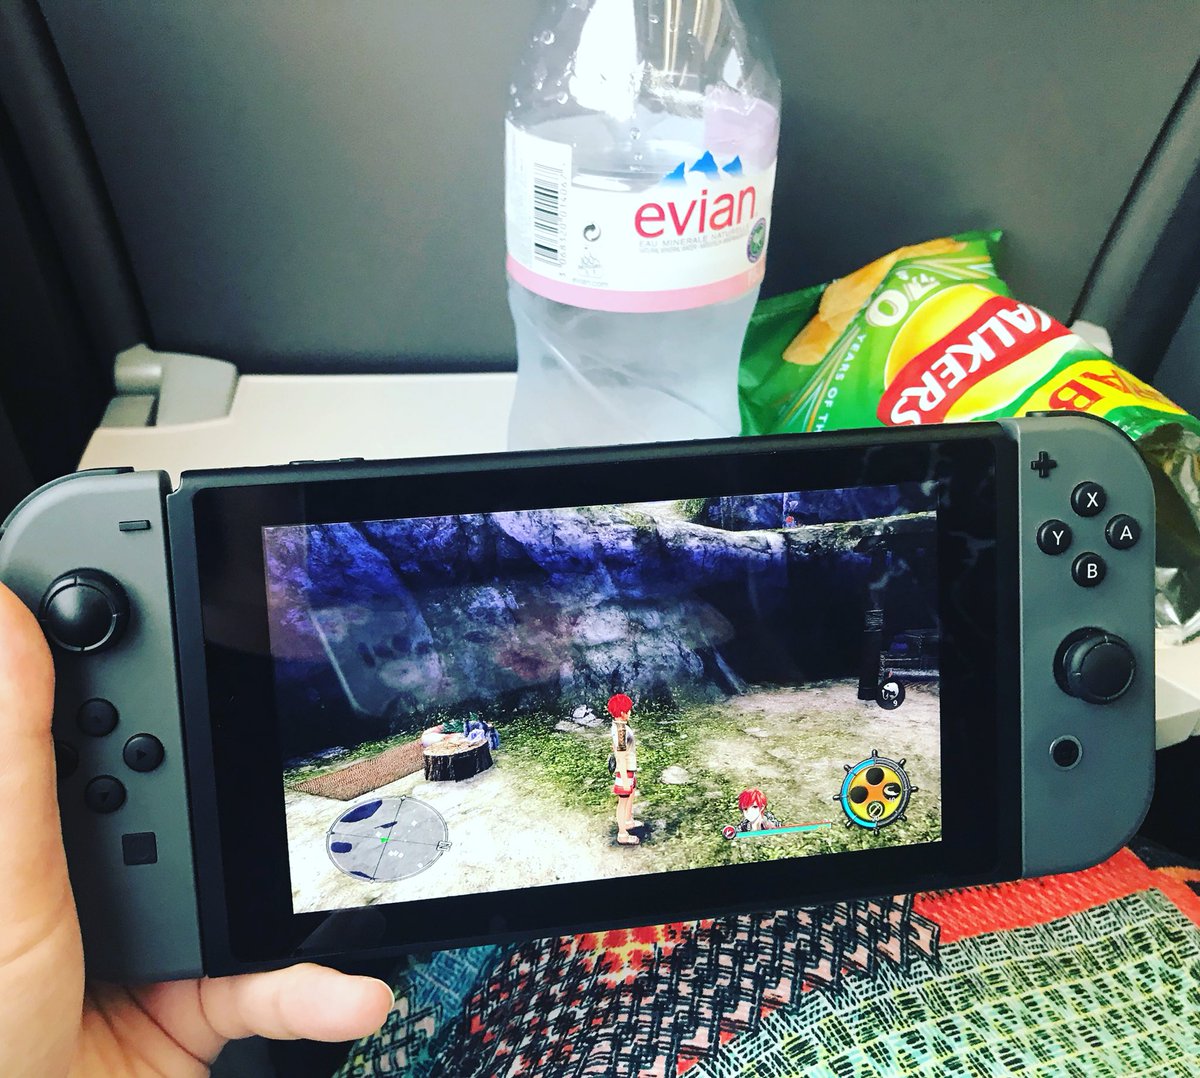 Train journeys with the switch 😍 #trainjourney #nintendoswitch #nintendo #train #trainjourneys #gamer #evian #walkers #travels #sunday #travellinginstyle